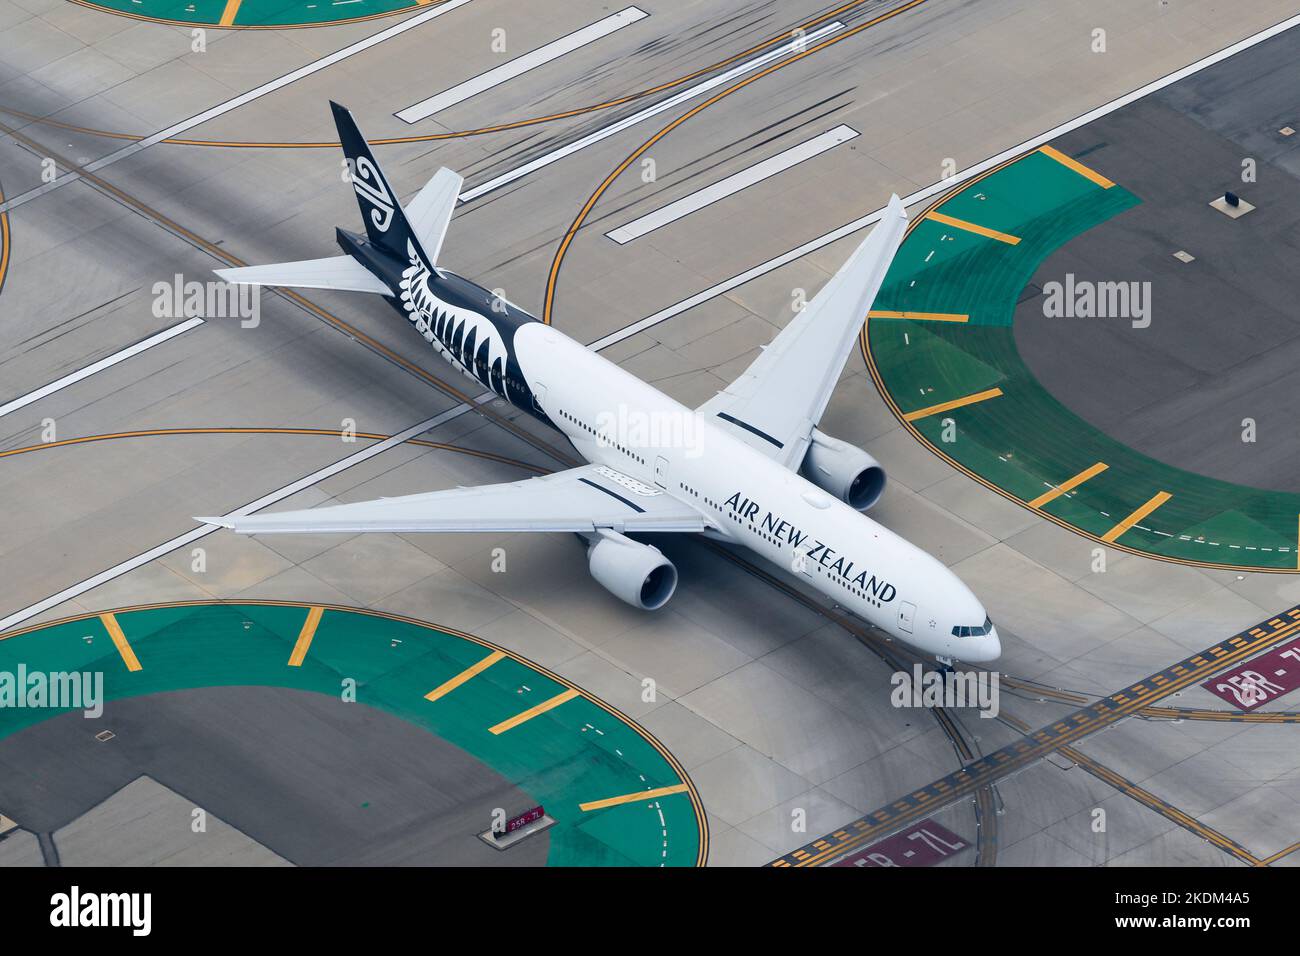 Air New Zealand / Air NZ Boeing 777 aircraft taxiing. Plane 777-300ER registered as ZK-OKP. Airplane of airline also know as Air NZ. Stock Photo